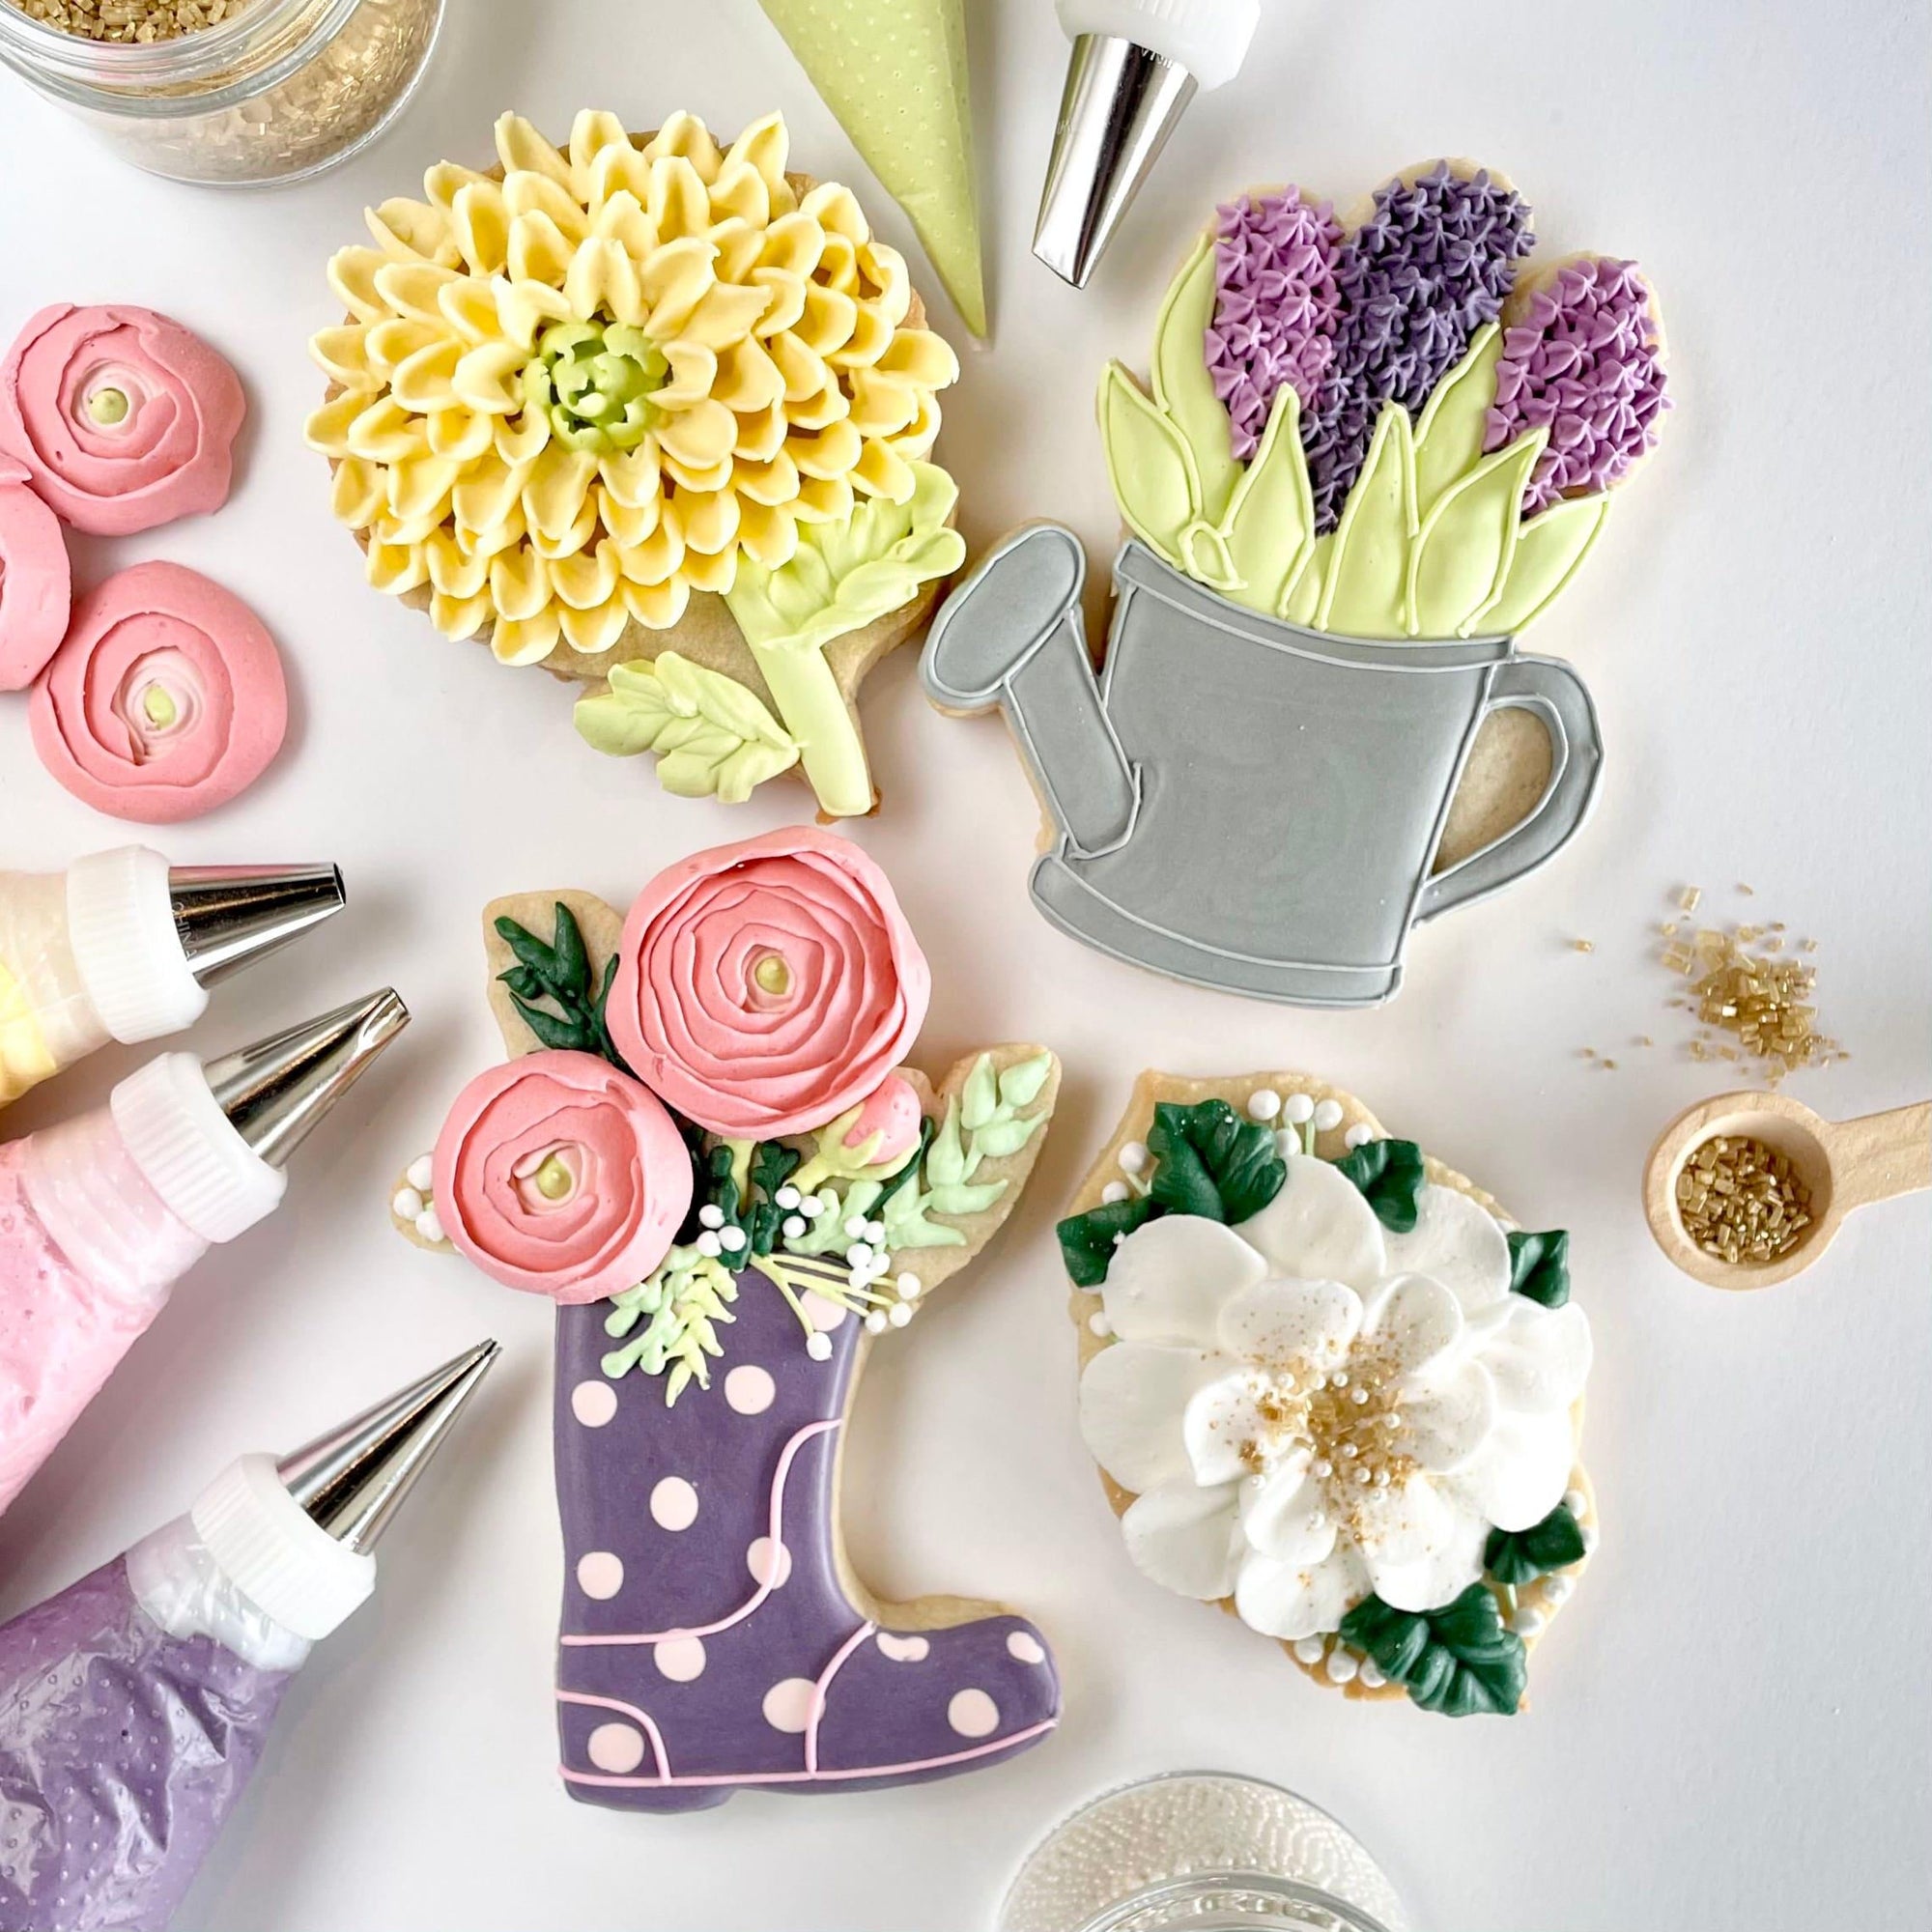 Lolly's Home Kitchen Flourishing Florals Cookie Class - Sweetleigh 